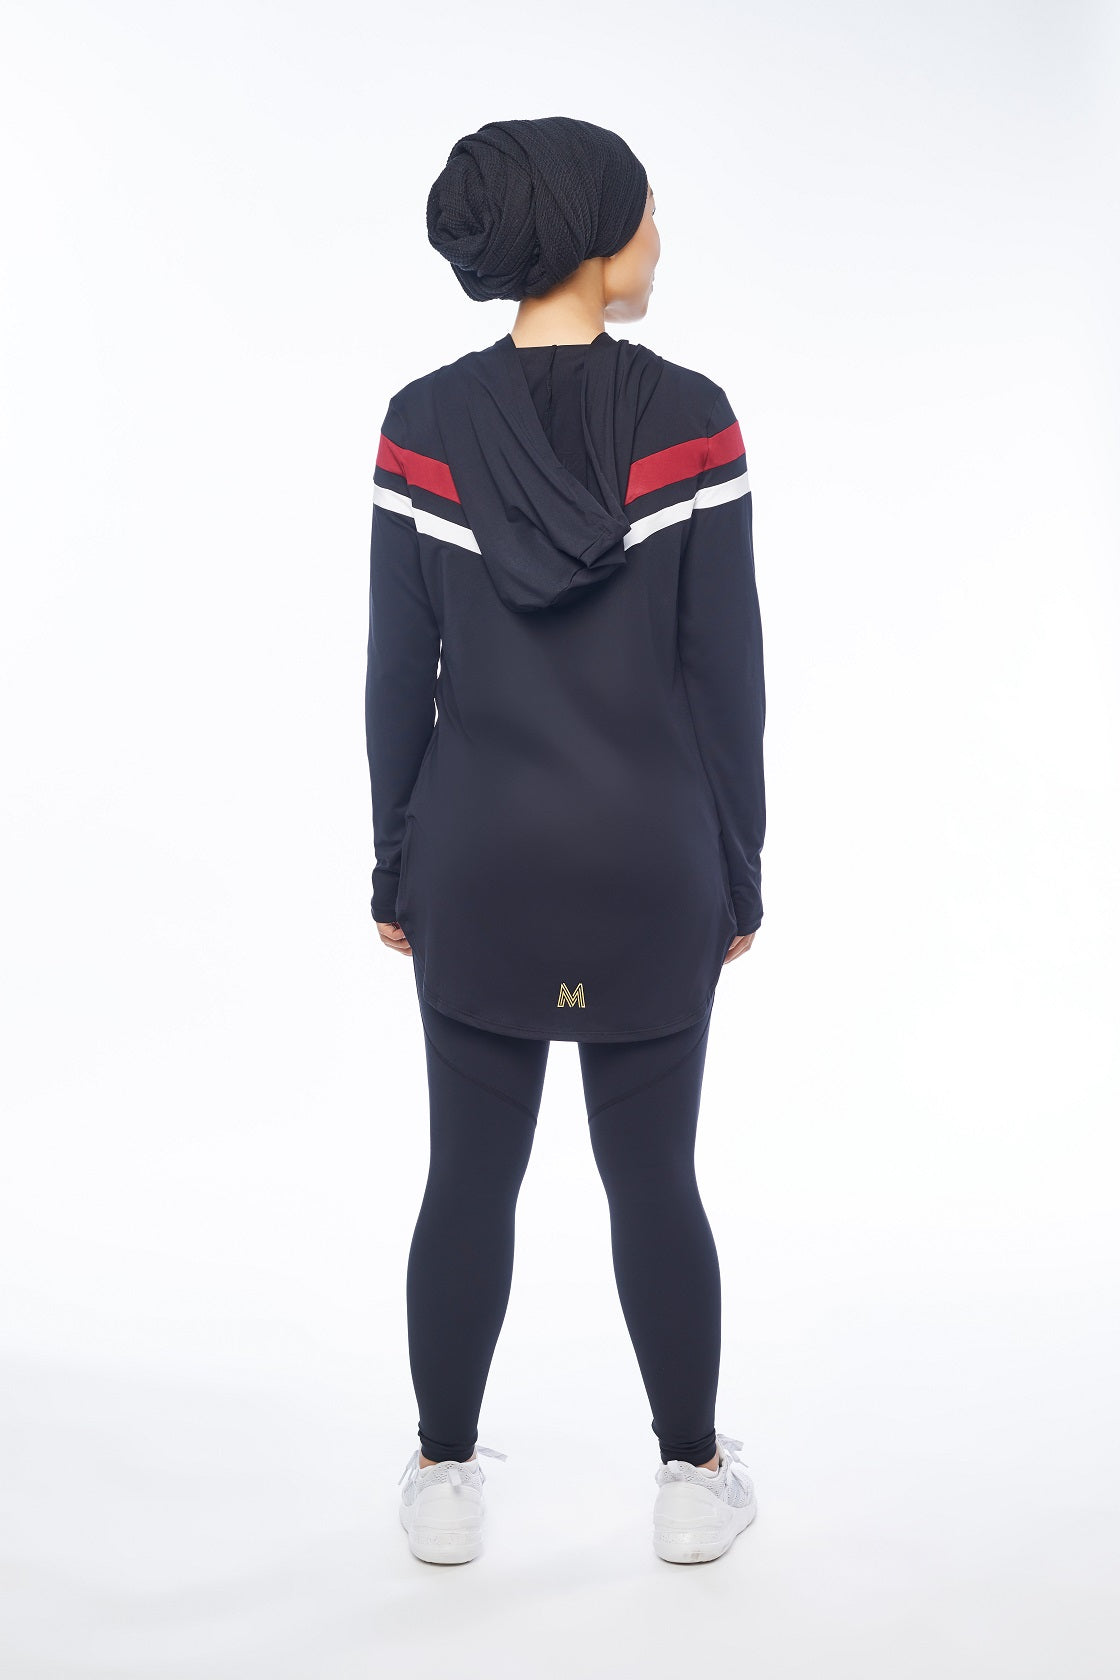 RISE UP Long Sleeve Top (Black)